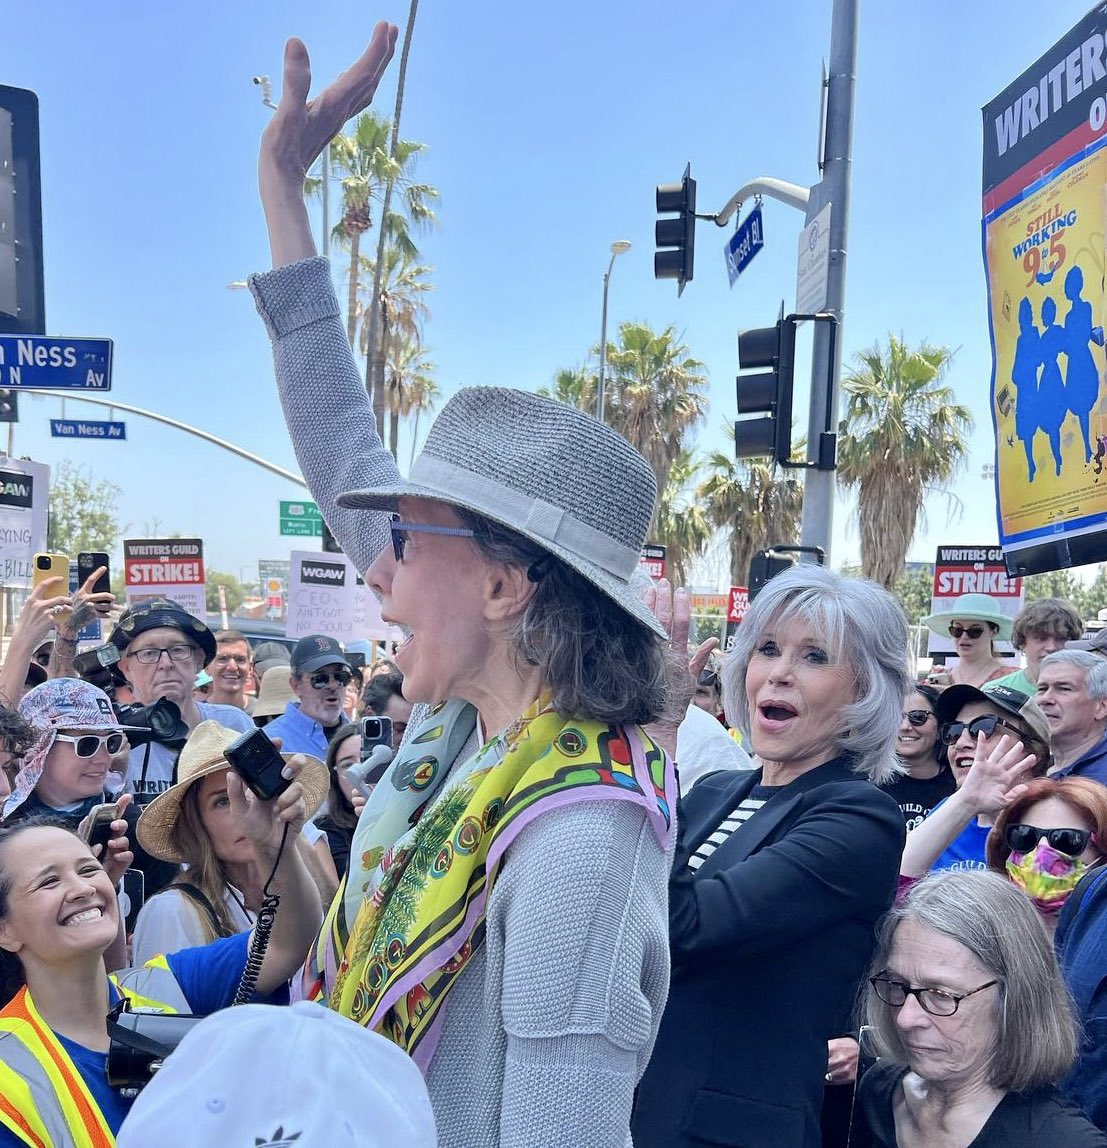 jane fonda and lily tomlin joined the picket line for the striking 9 to 5 pride event at netflix #wgastrike